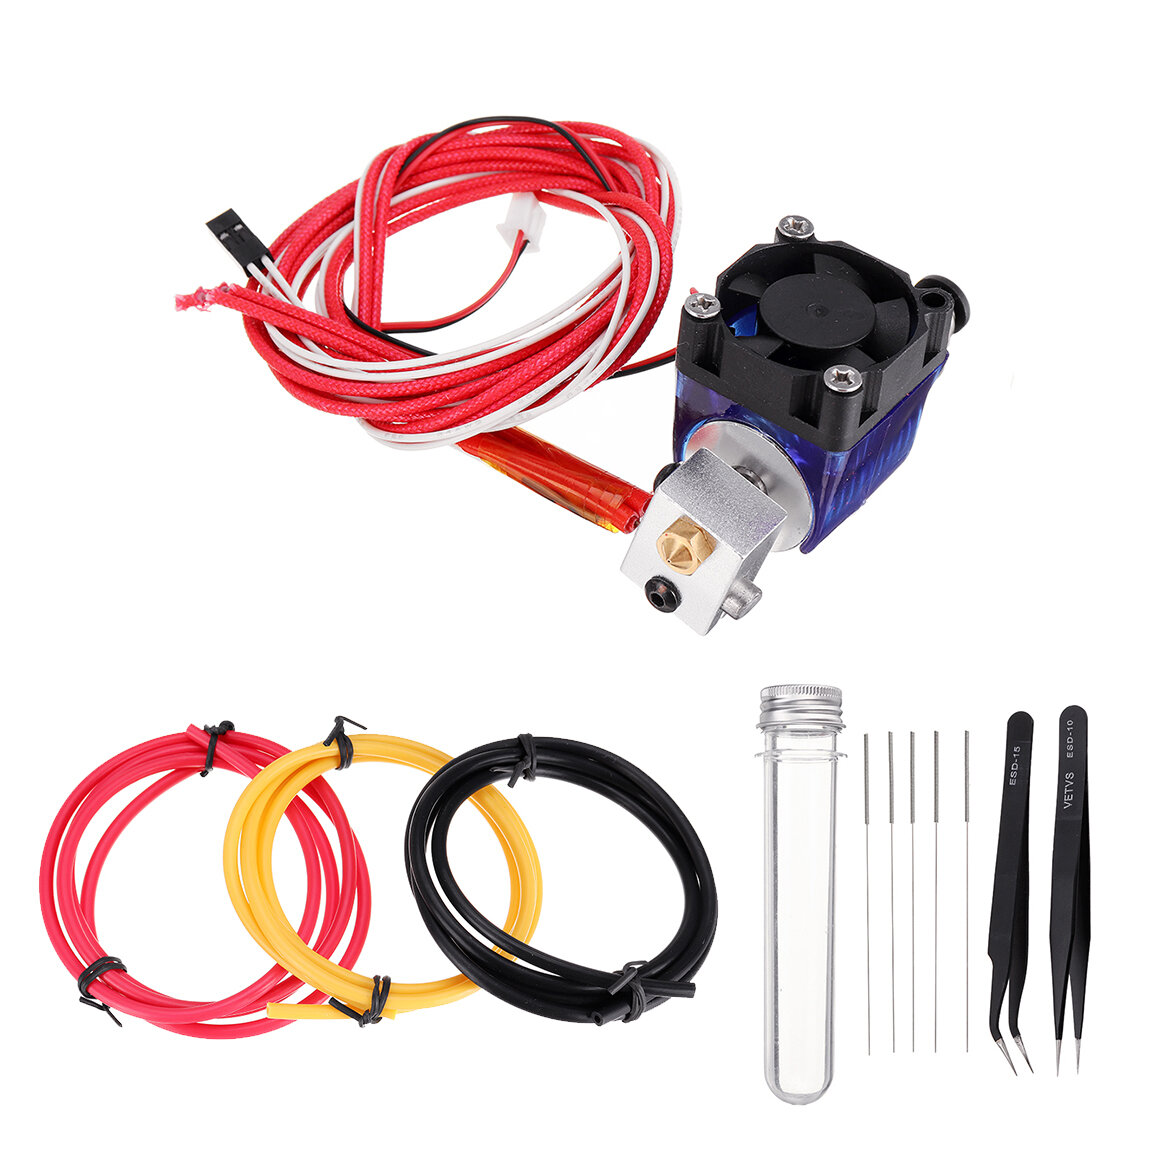 

V6 0.4mm All Metal Long-distance Extruder Kit with 0.4mm Cleaning Needle Nozzle Cleaning Tool + Tweezers + PTEF Tube for